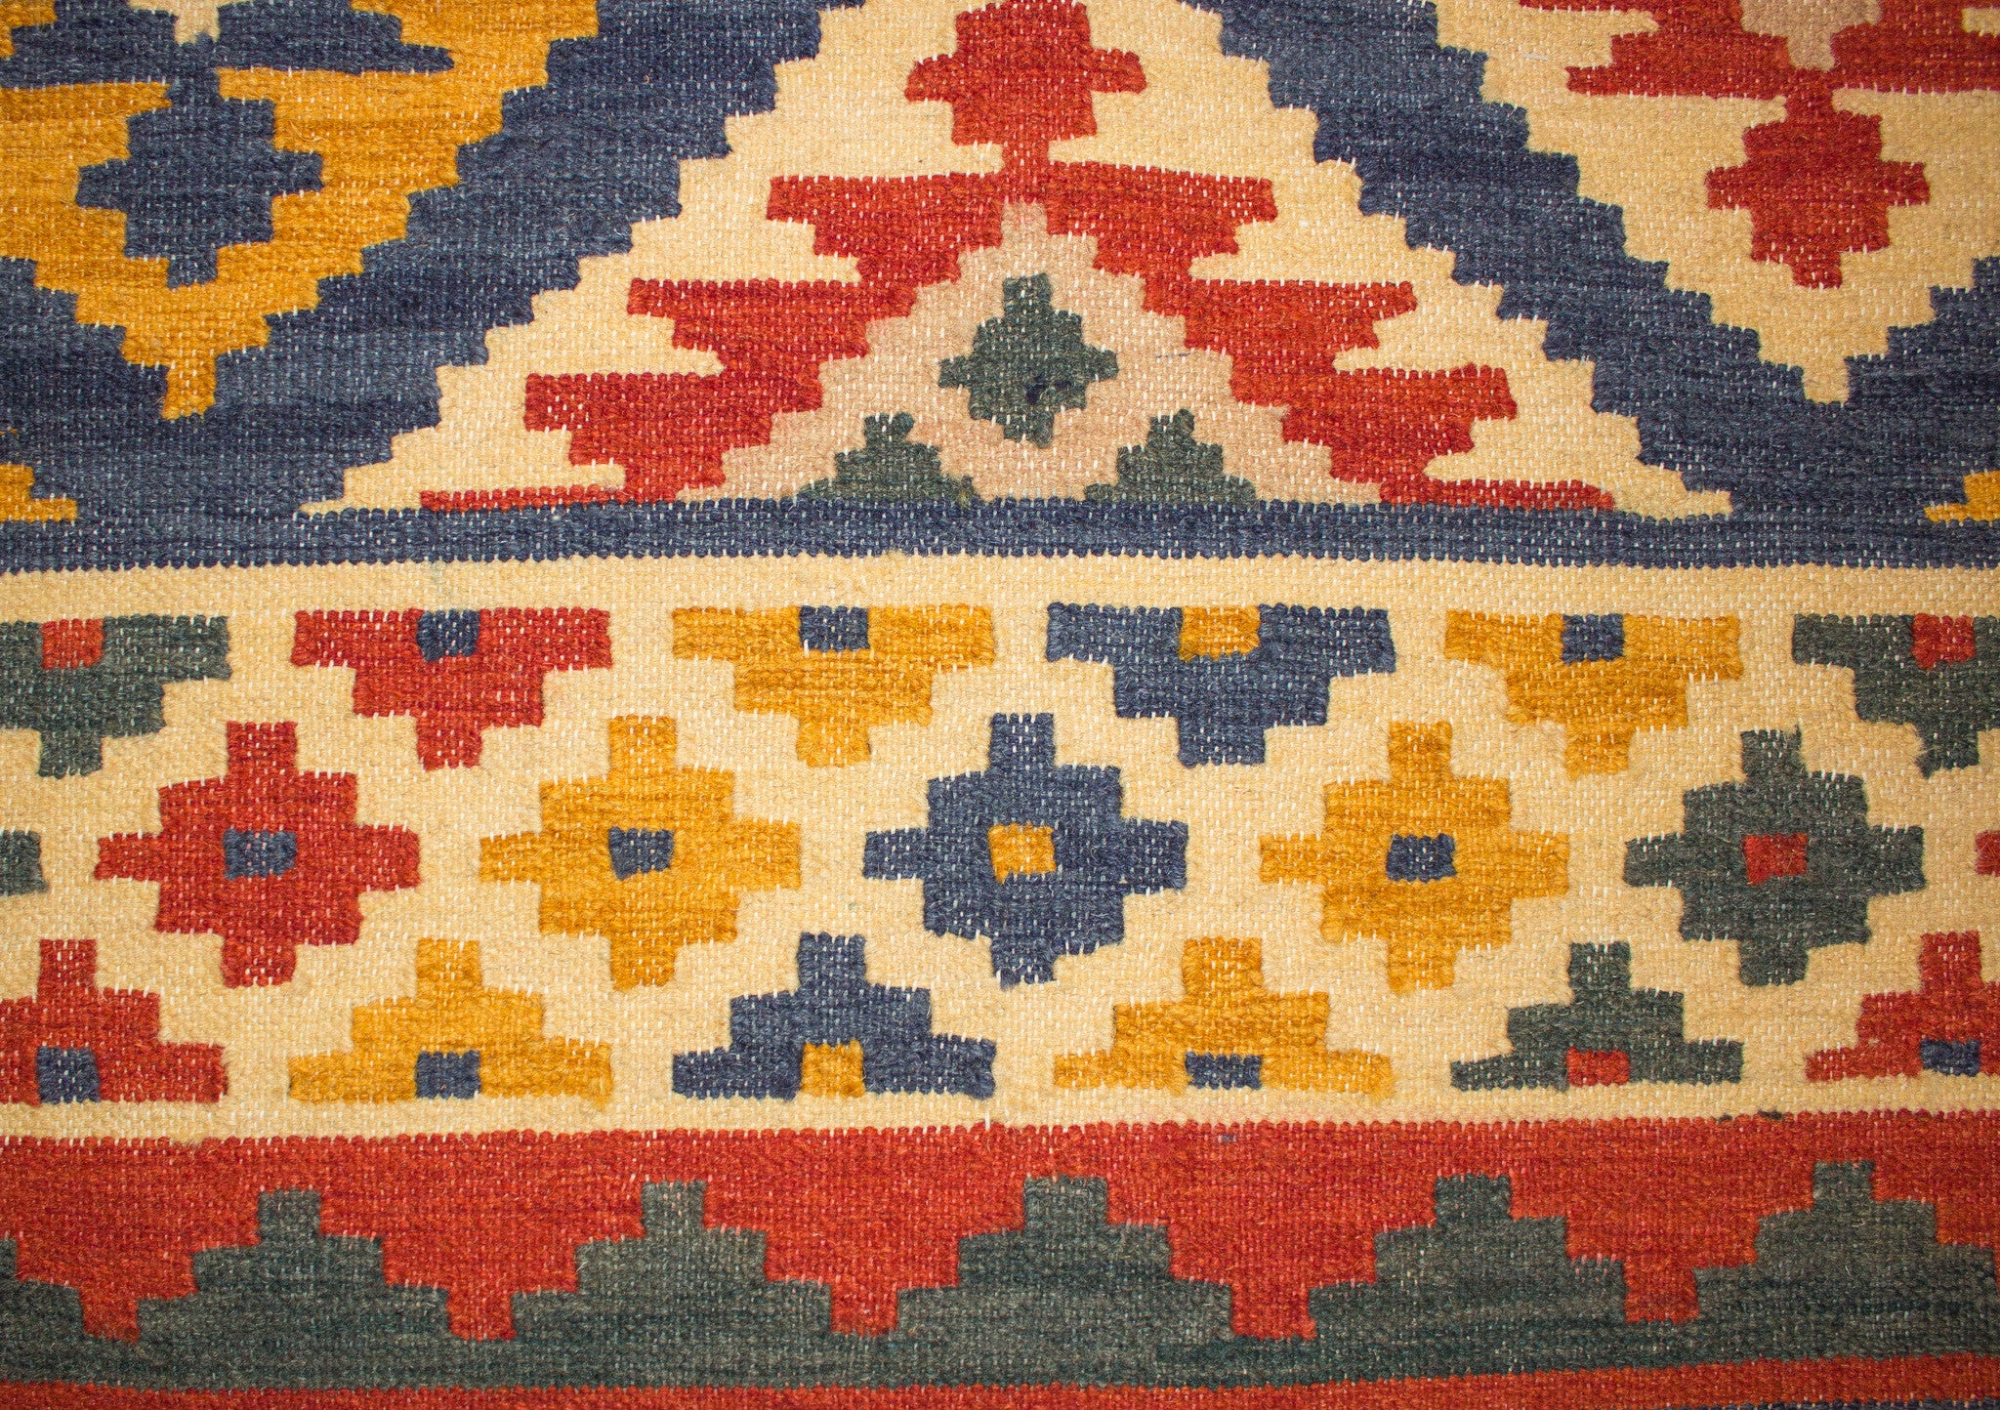 Kilim Multi Hand Woven Rug-Area rug for living room, dining area, and bedroom